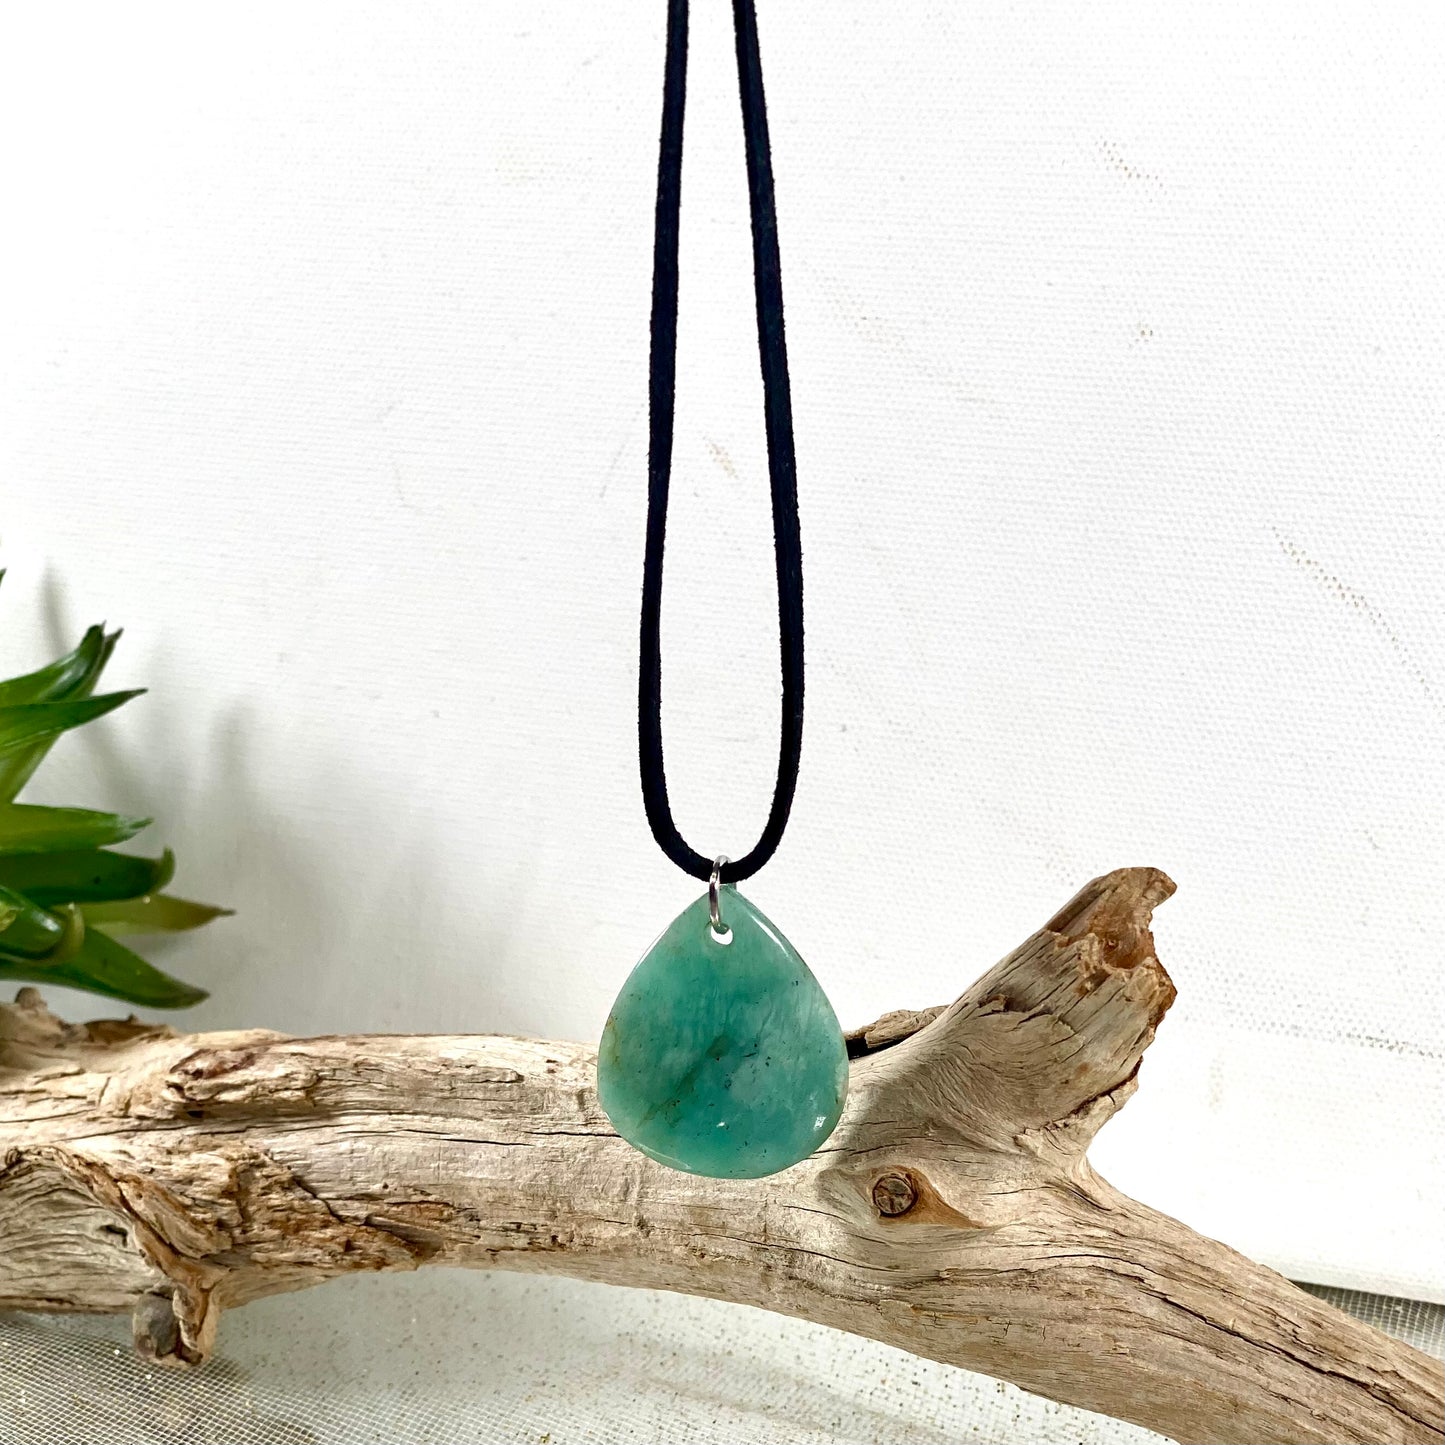 Amazonite Crystal Healing Pendant on Adjustable Suede Choker - Embrace Calm and Balance